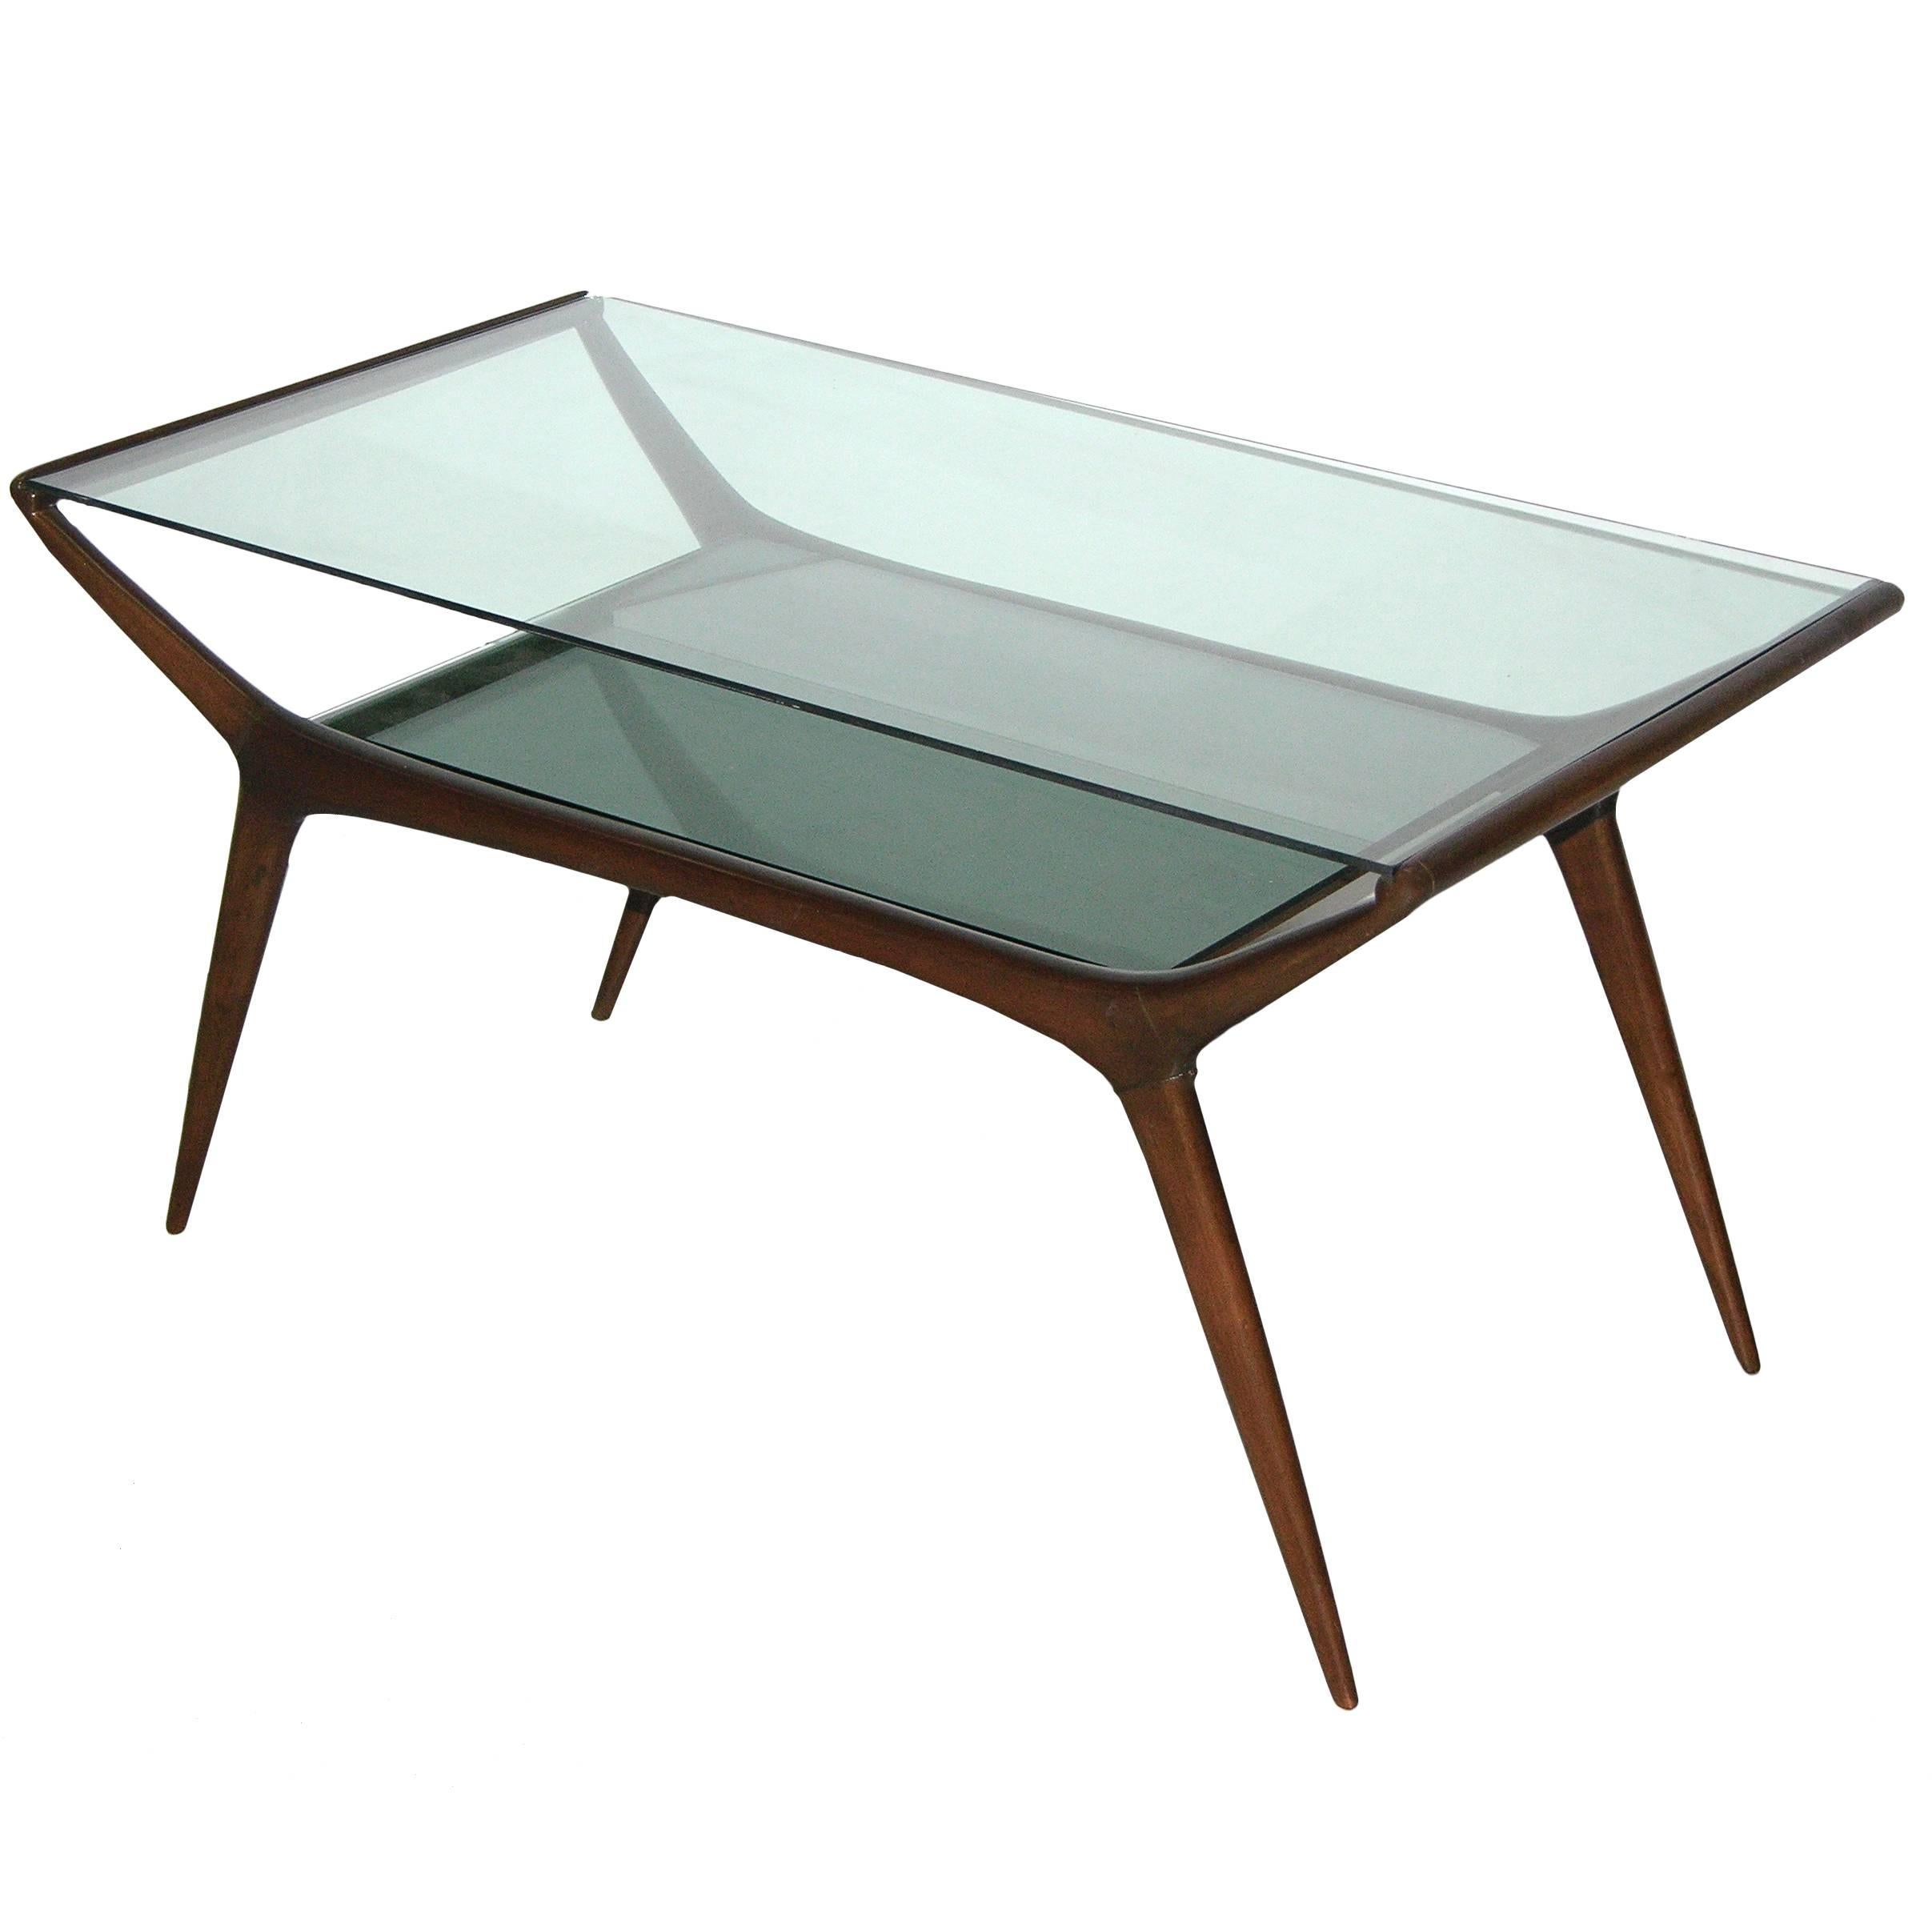 Ico Parisi 1950s Italian Modern Two-Tier Mahogany and Glass Sofa or Coffee Table